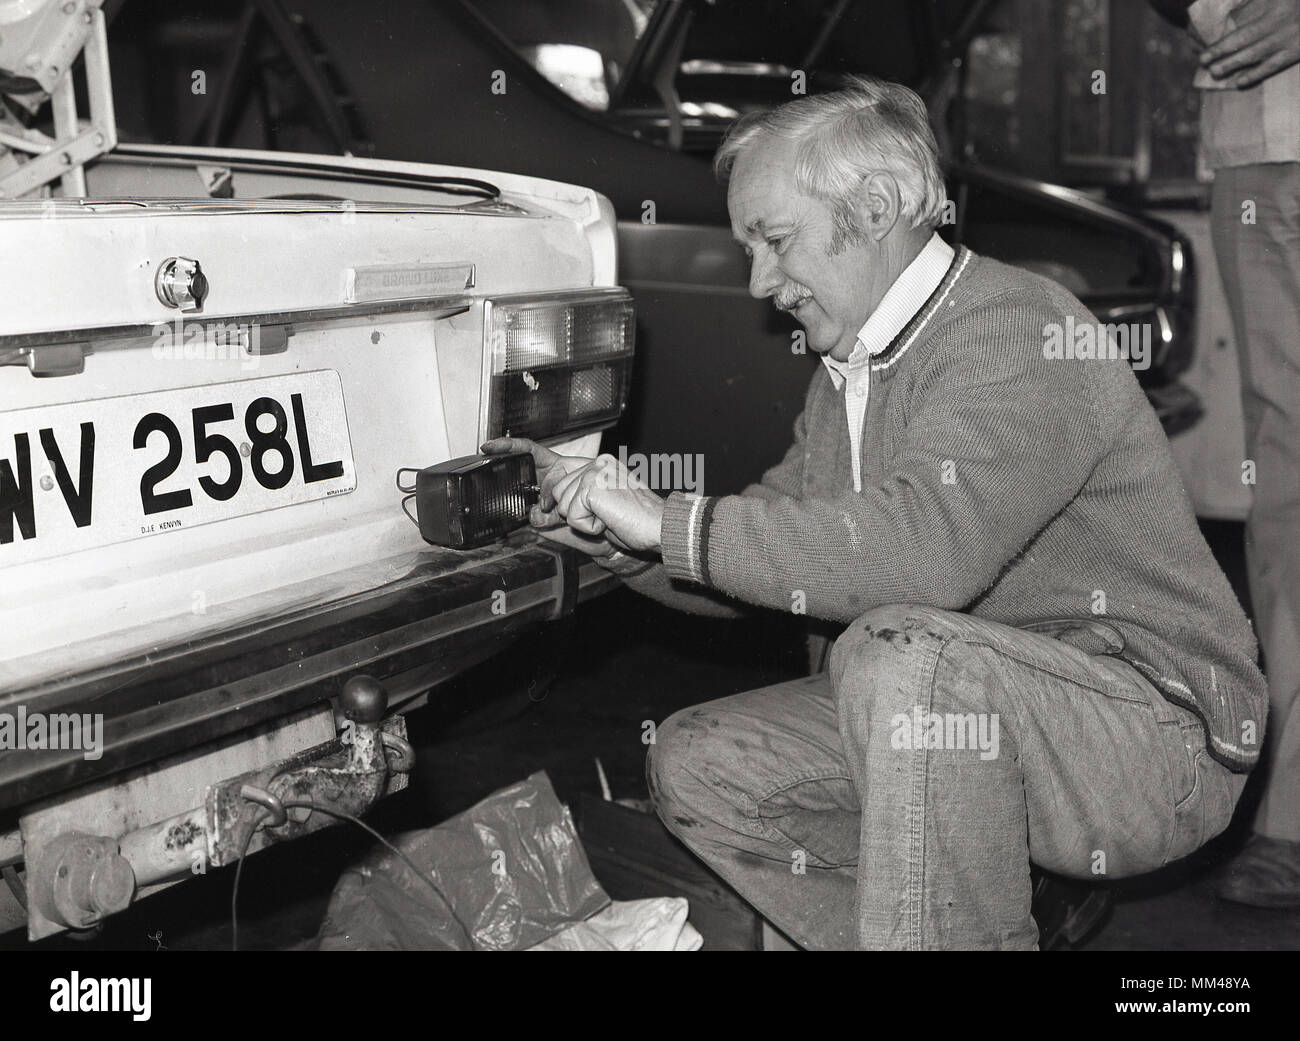 1970s, historical, a man attending an adult education class of car  maintenance or servicing, kneeling down while working on the back lights of a volvo motorcar, England, UK. Stock Photo